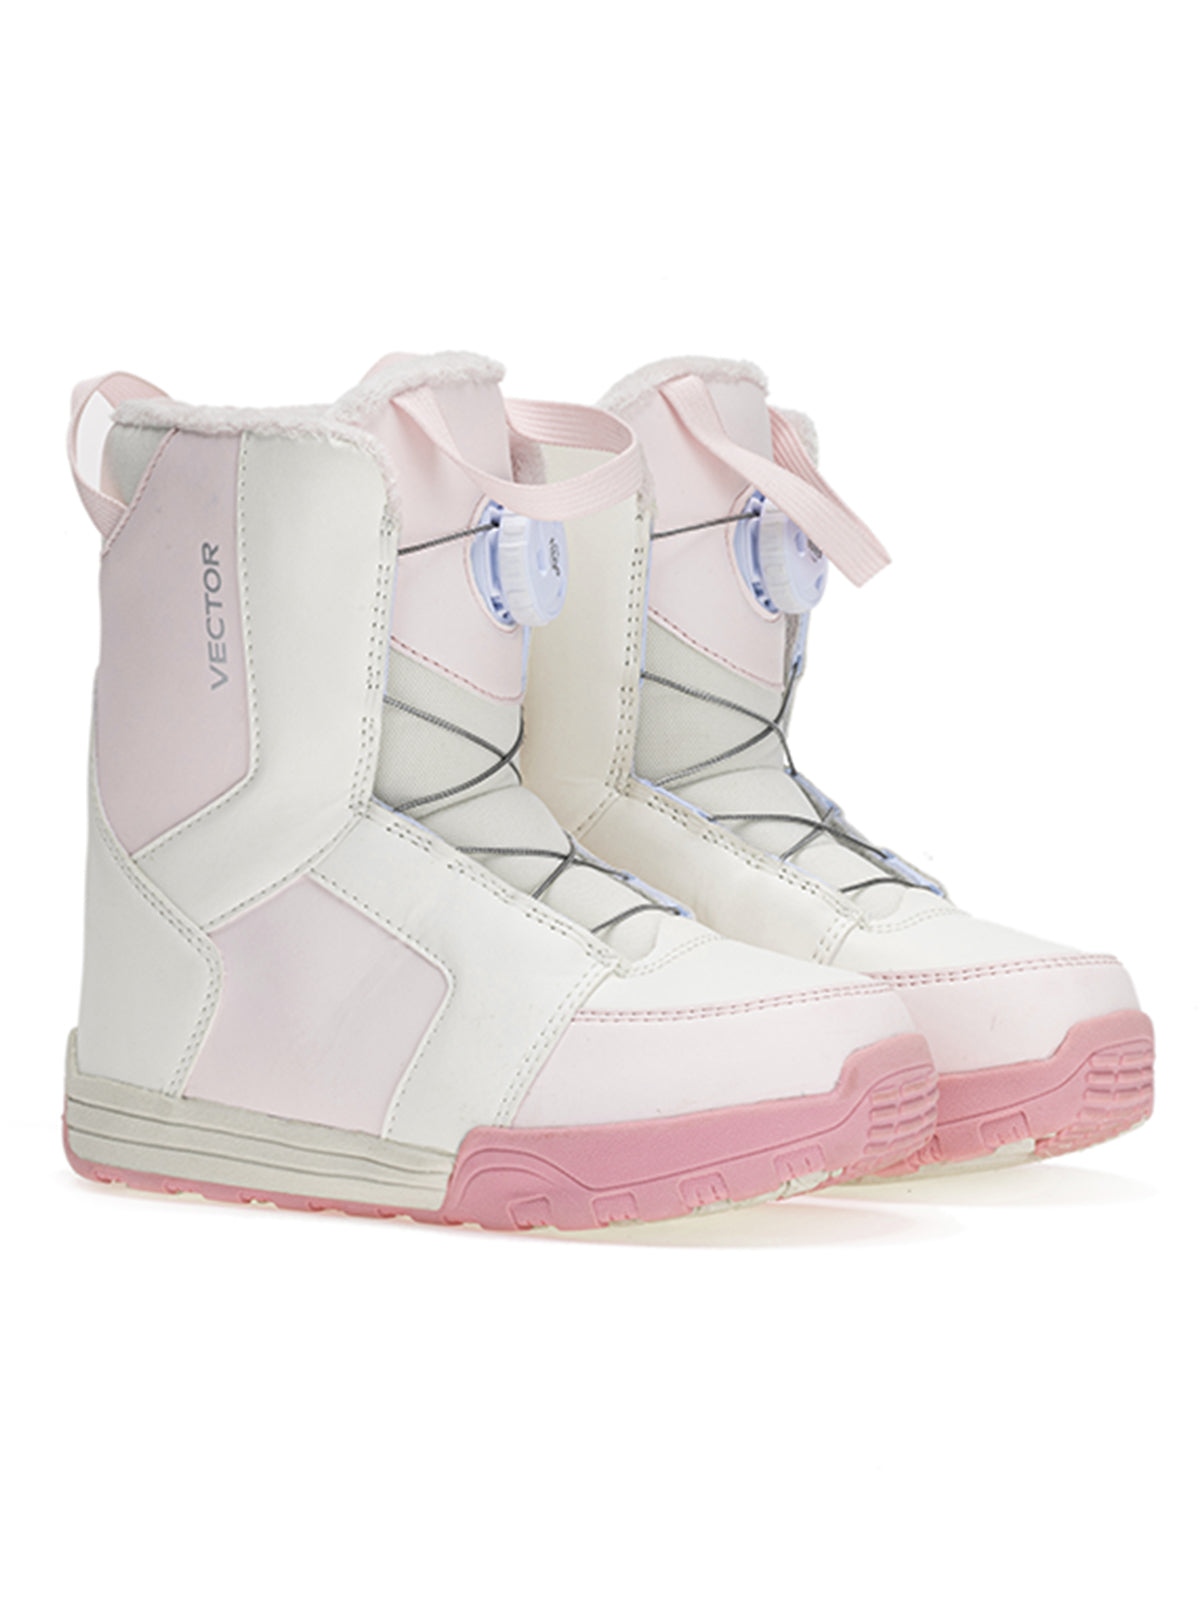 Kids' Utility Snowboard Boots